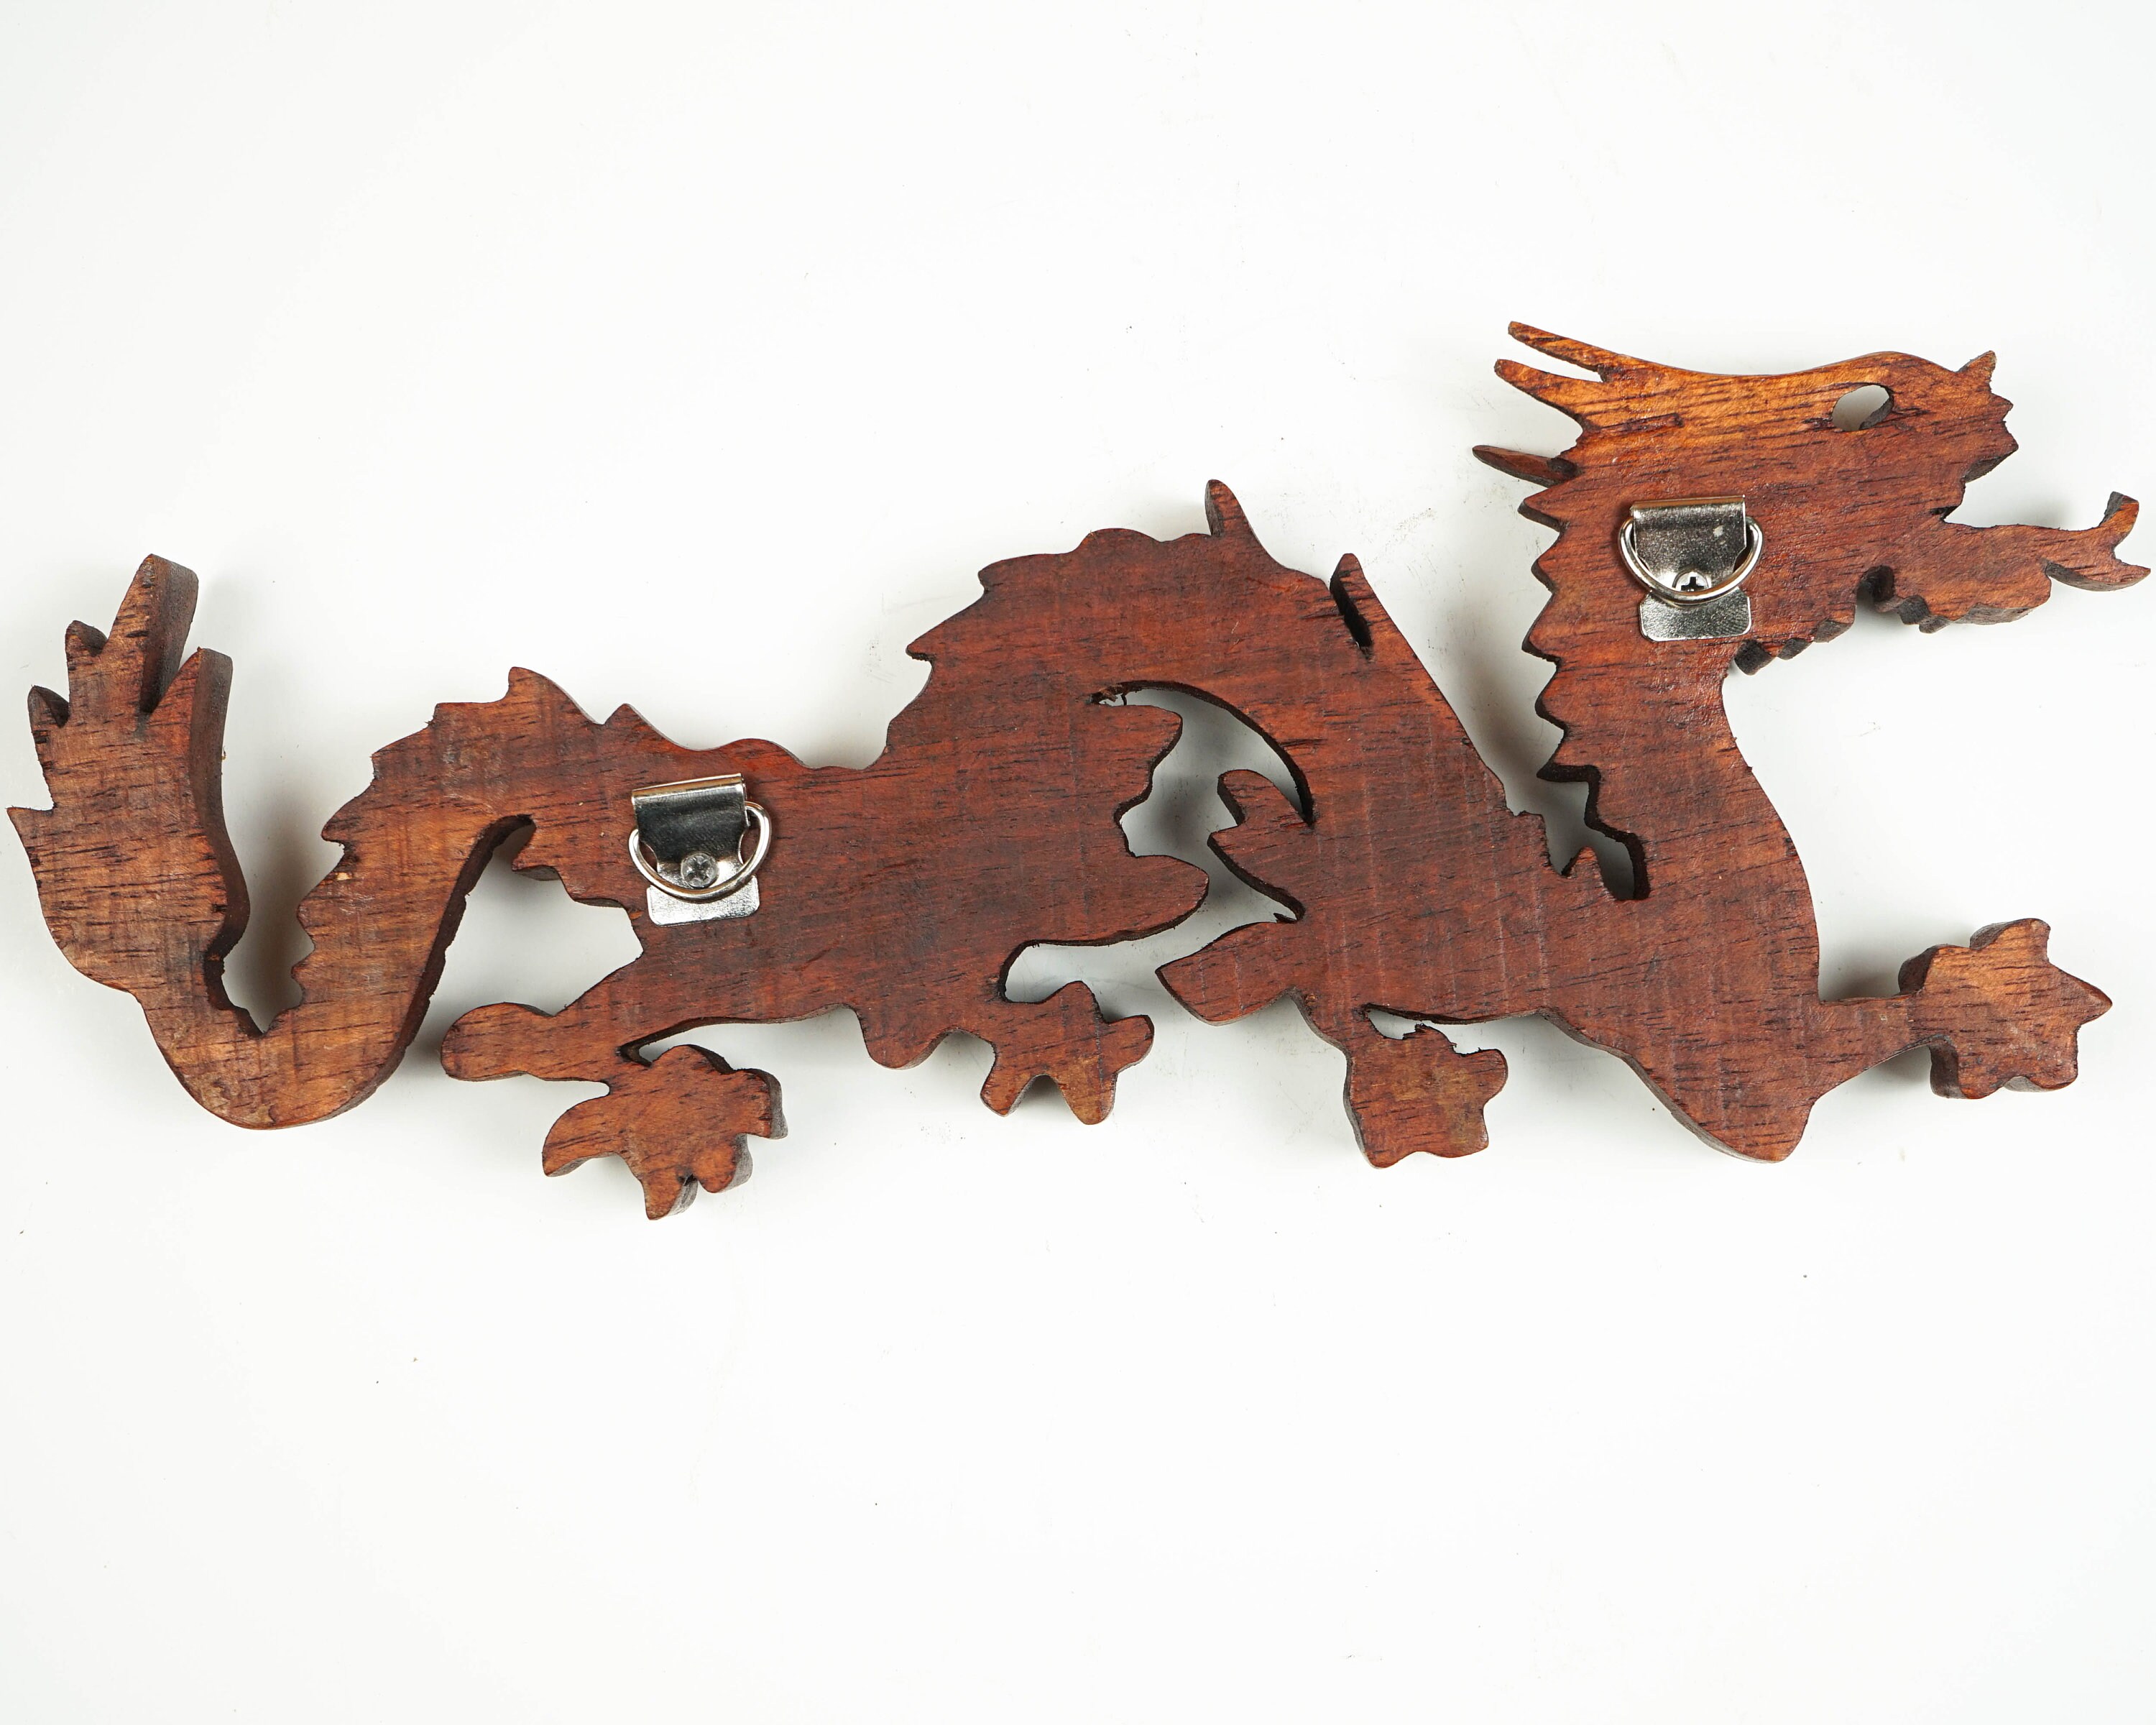 Wooden Dragon Statue, Wall Hangings, Chinese Dragon, Mystical Animal, Wall  Art, Wood Carving, Room Decor, Handmade Gift, Gift for Him 